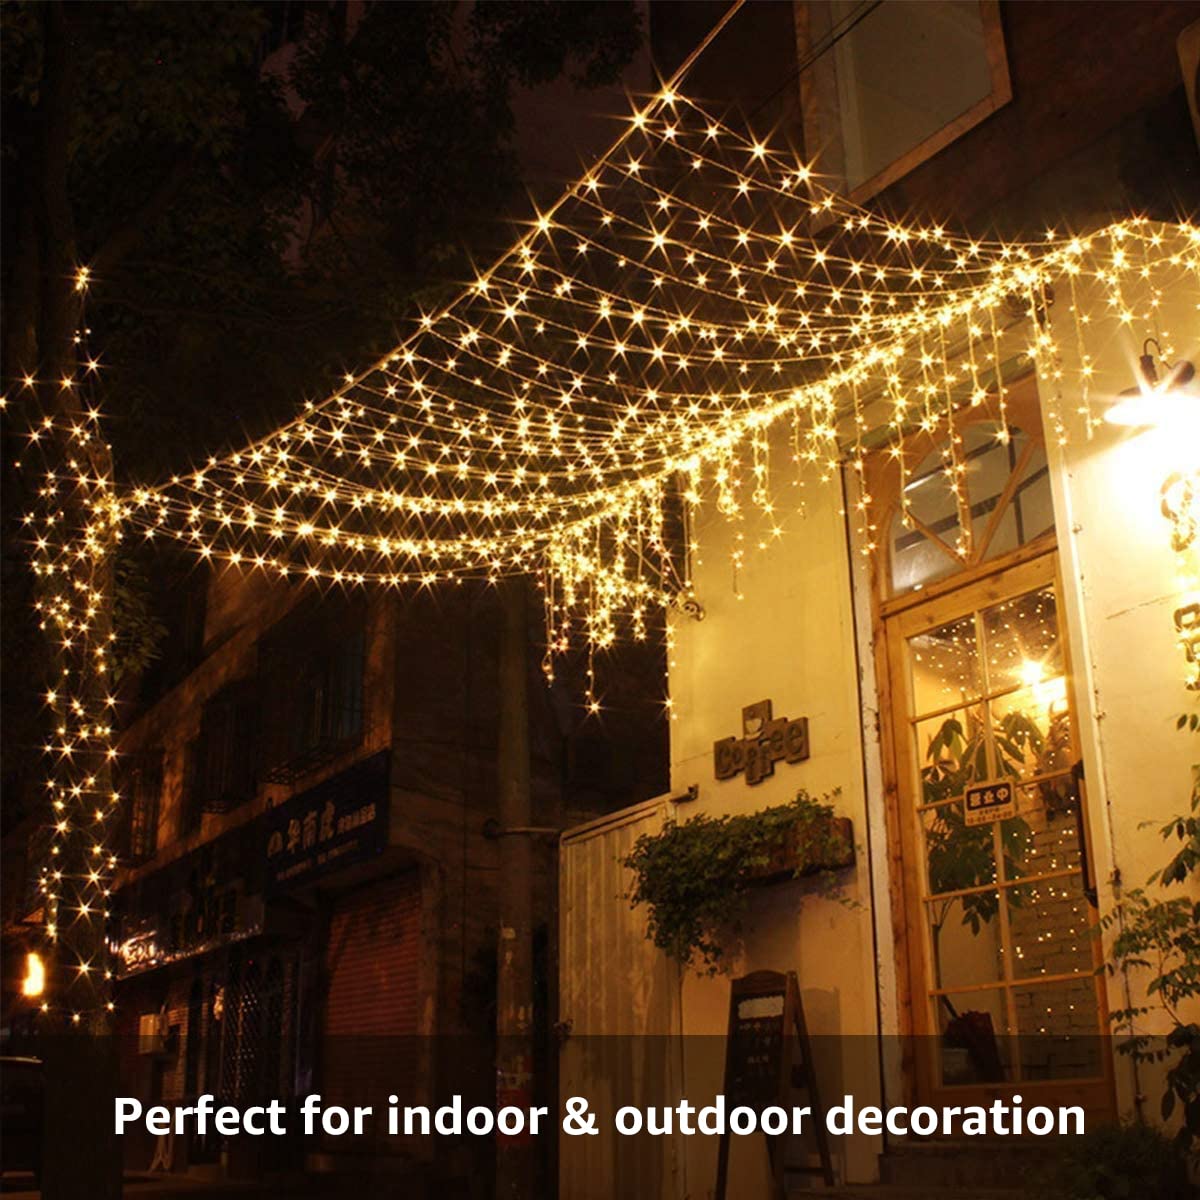 Lighting EVER Curtain Lights, 306 LED 10×10 ft High Density Plug in Window Hanging Fairy String Lights for Wedding Party Backdrop Gazebo, Twinkle Lights for Bedroom Wall (18 Strings, 6.9